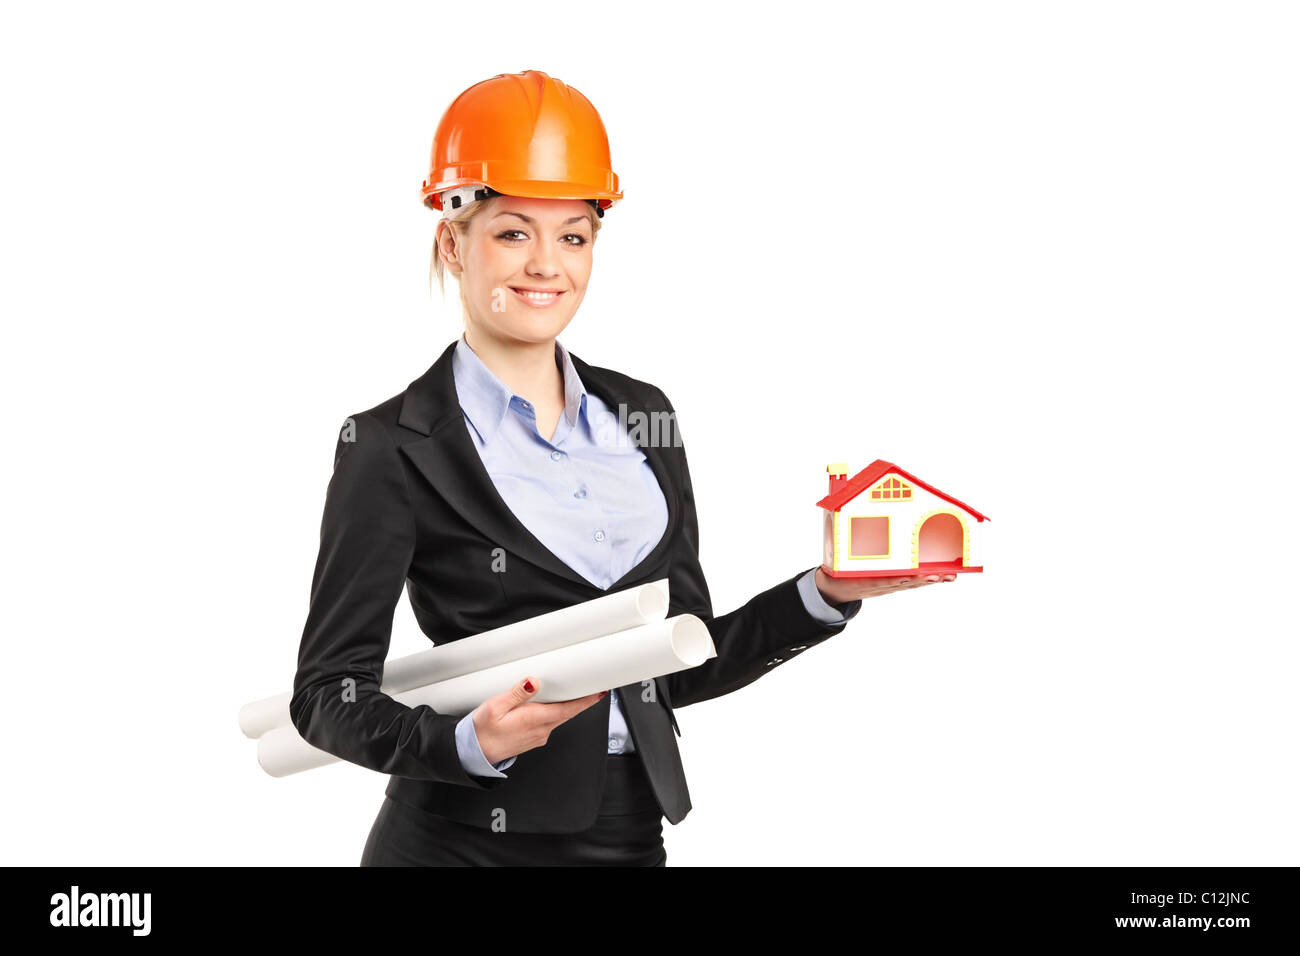 A smiling forewoman holding a model house and blueprints Stock Photo